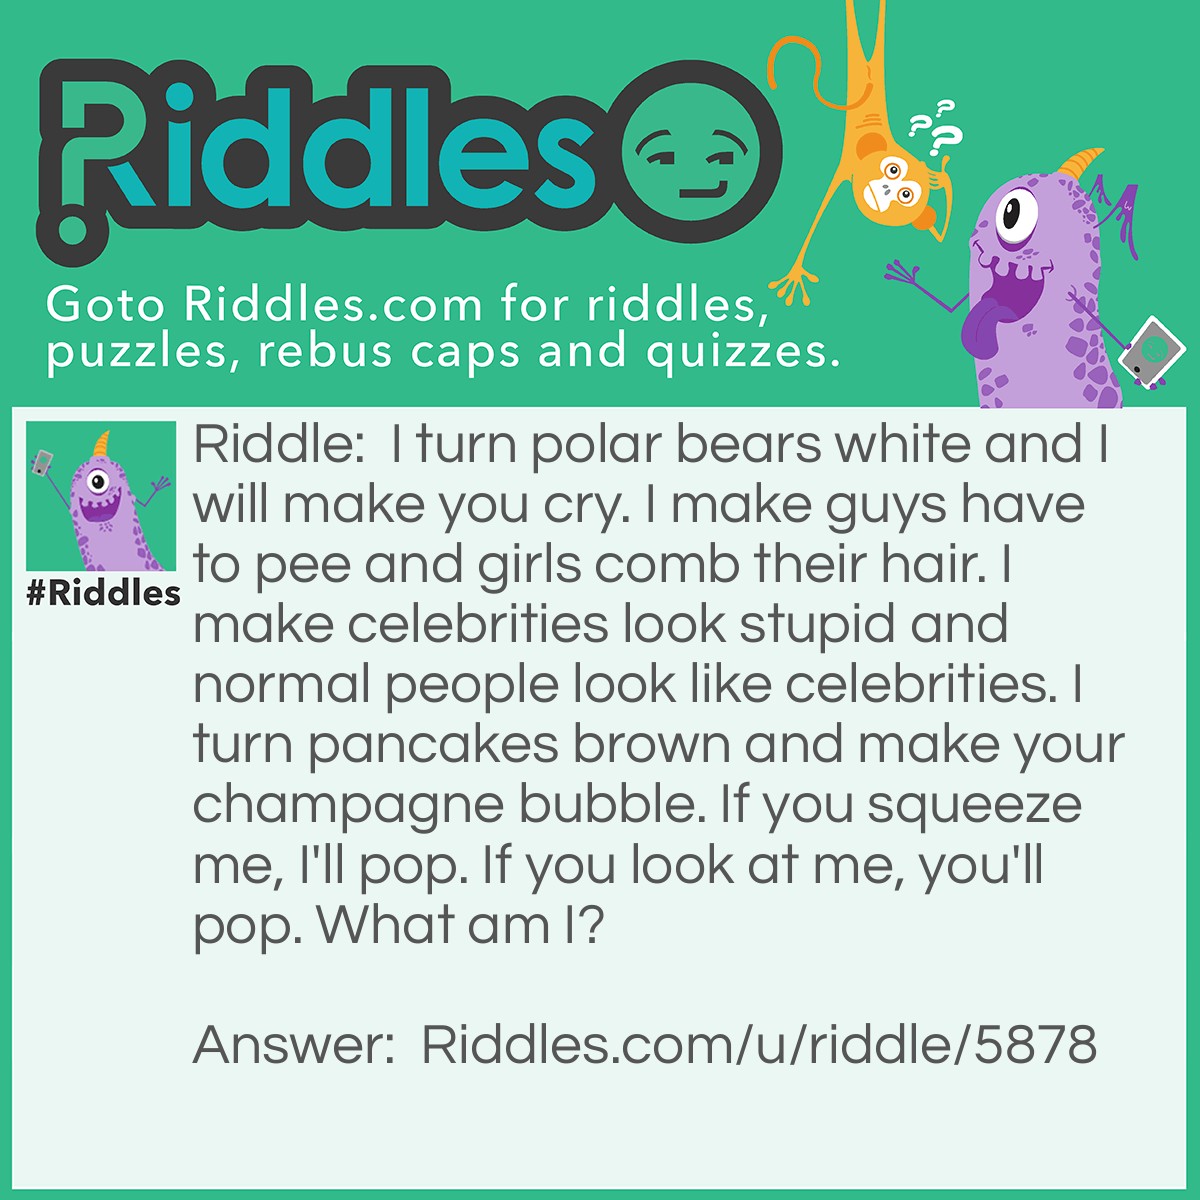 Riddle: I turn polar bears white and I will make you cry. I make guys have to pee and girls comb their hair. I make celebrities look stupid and normal people look like celebrities. I turn pancakes brown and make your champagne bubble. If you squeeze me, I'll pop. If you look at me, you'll pop. What am I? Answer: Pressure.